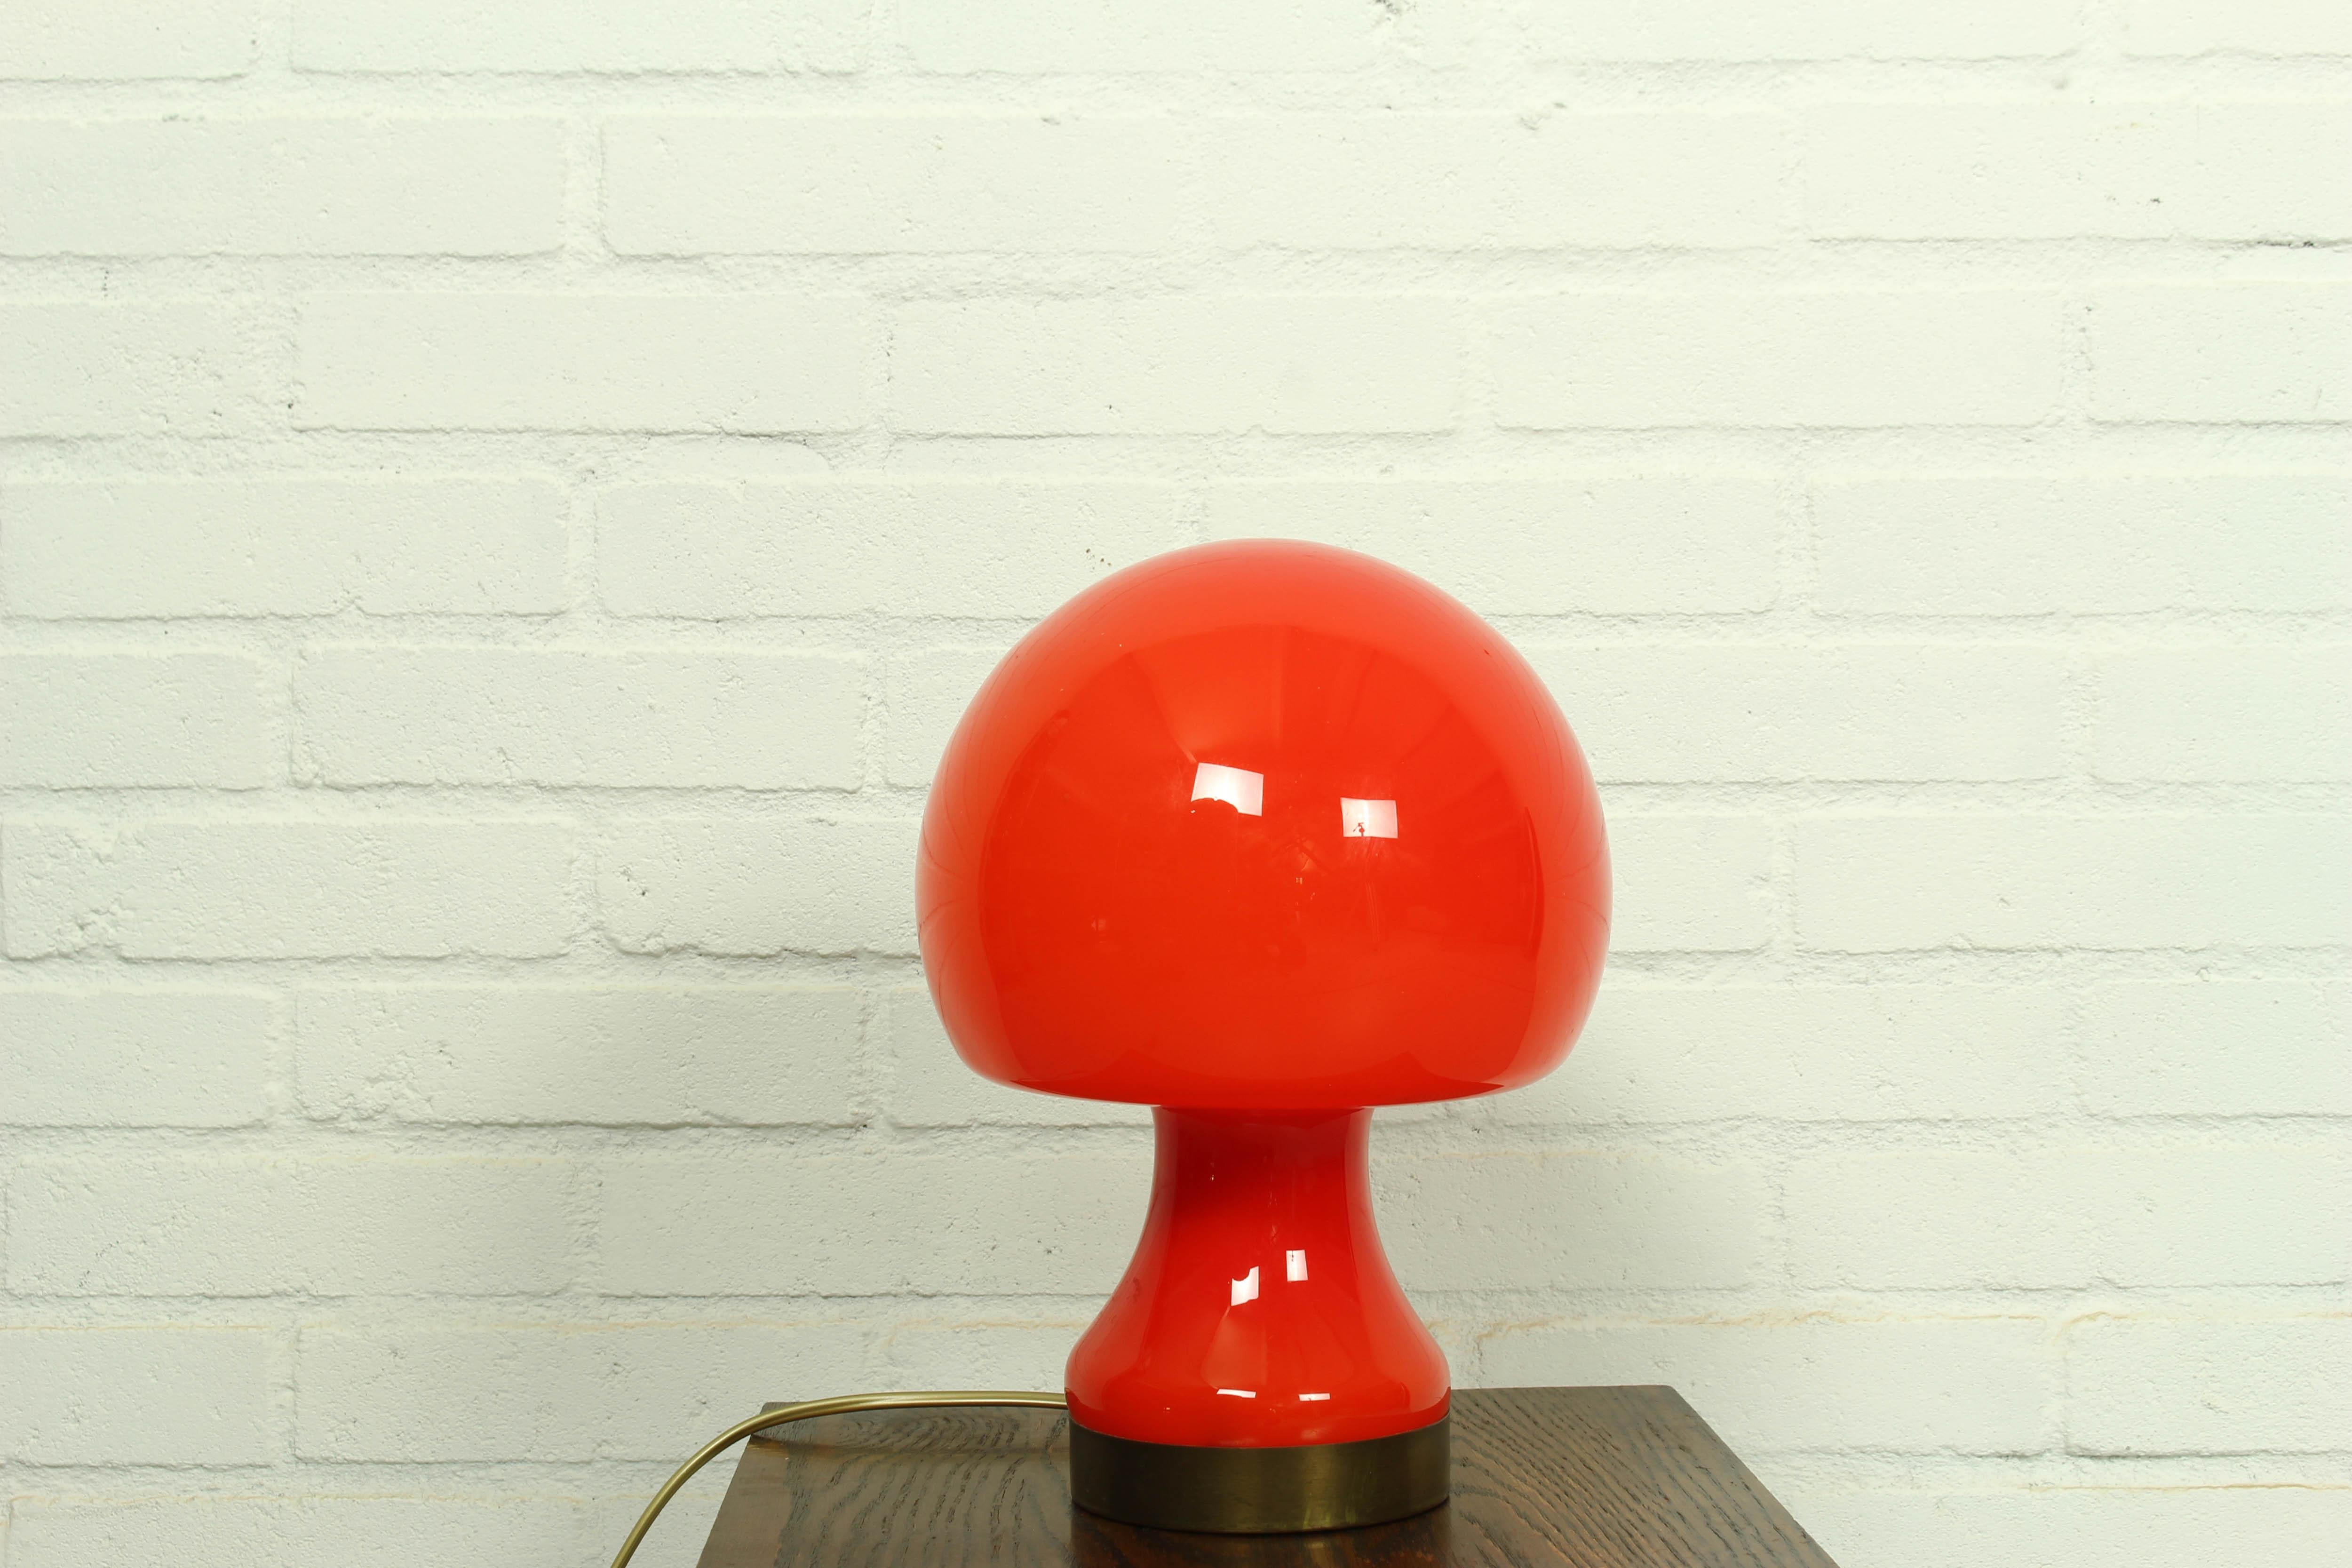 Vintage red mushroom table lamp was made in Italy in the 1970s. Retro lamp will bring to your home the atmosphere of 70s Italy, the era of the space age. A mid-century table lamp will look great in an Art Deco or Mid-Century Modern interior.